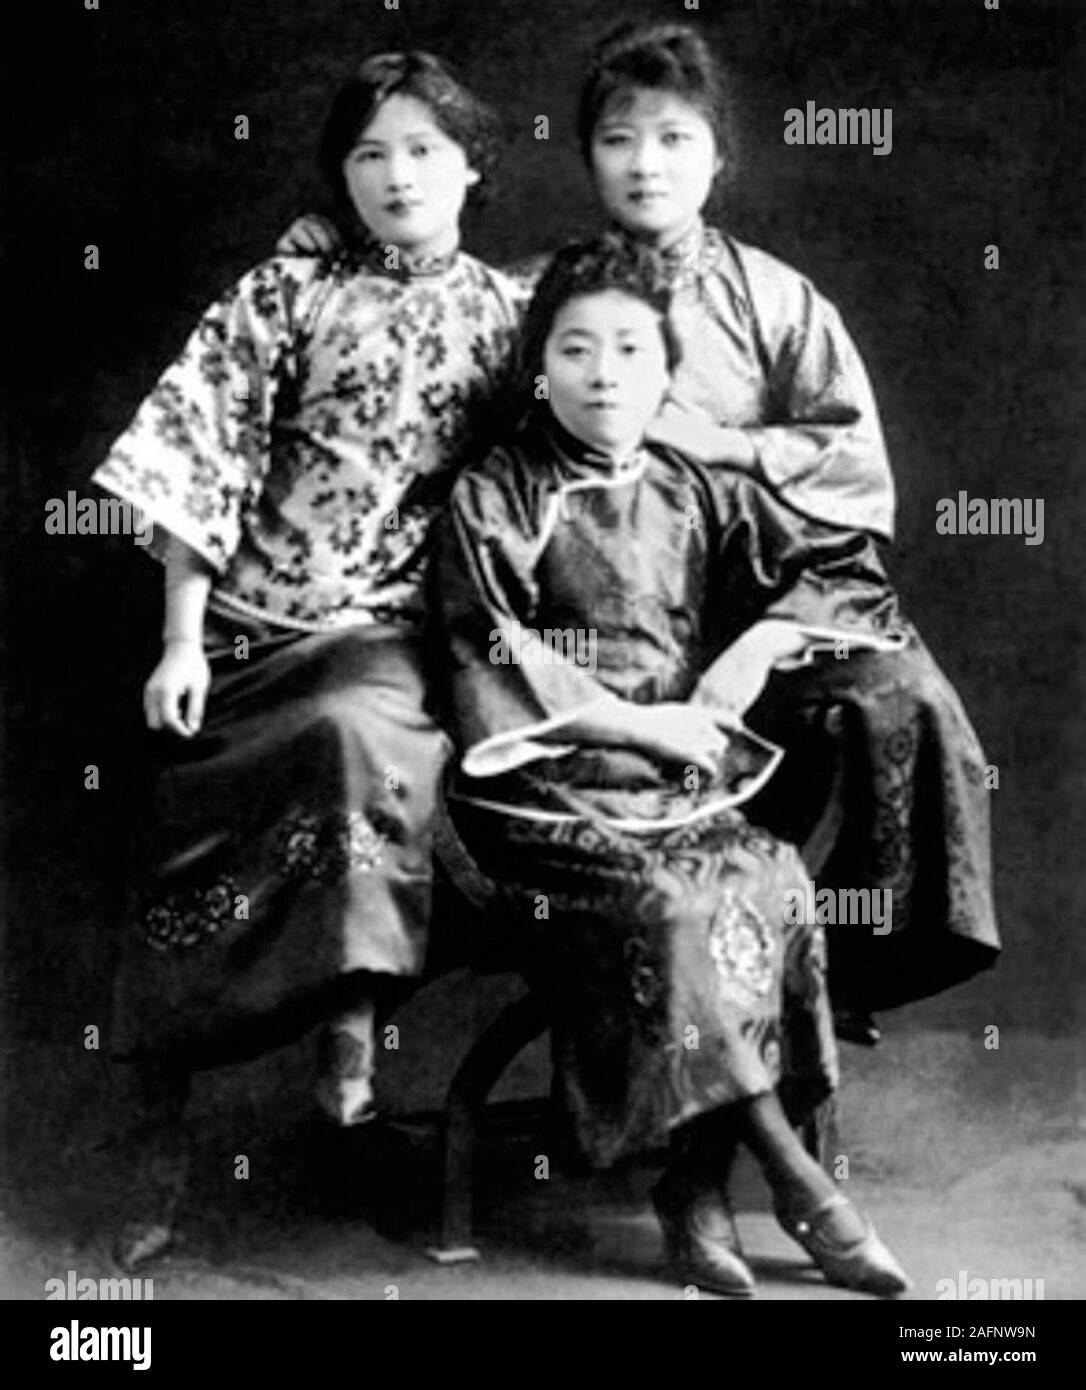 The three Soong sisters: Soong Ching Ling at the left, Soong Ai Ling in the middle and Soong Mei Ling at the right. The Soong sisters were three Shanghainese Chinese women who were, along with their husbands, amongst China's most significant political figures of the early 20th century Stock Photo